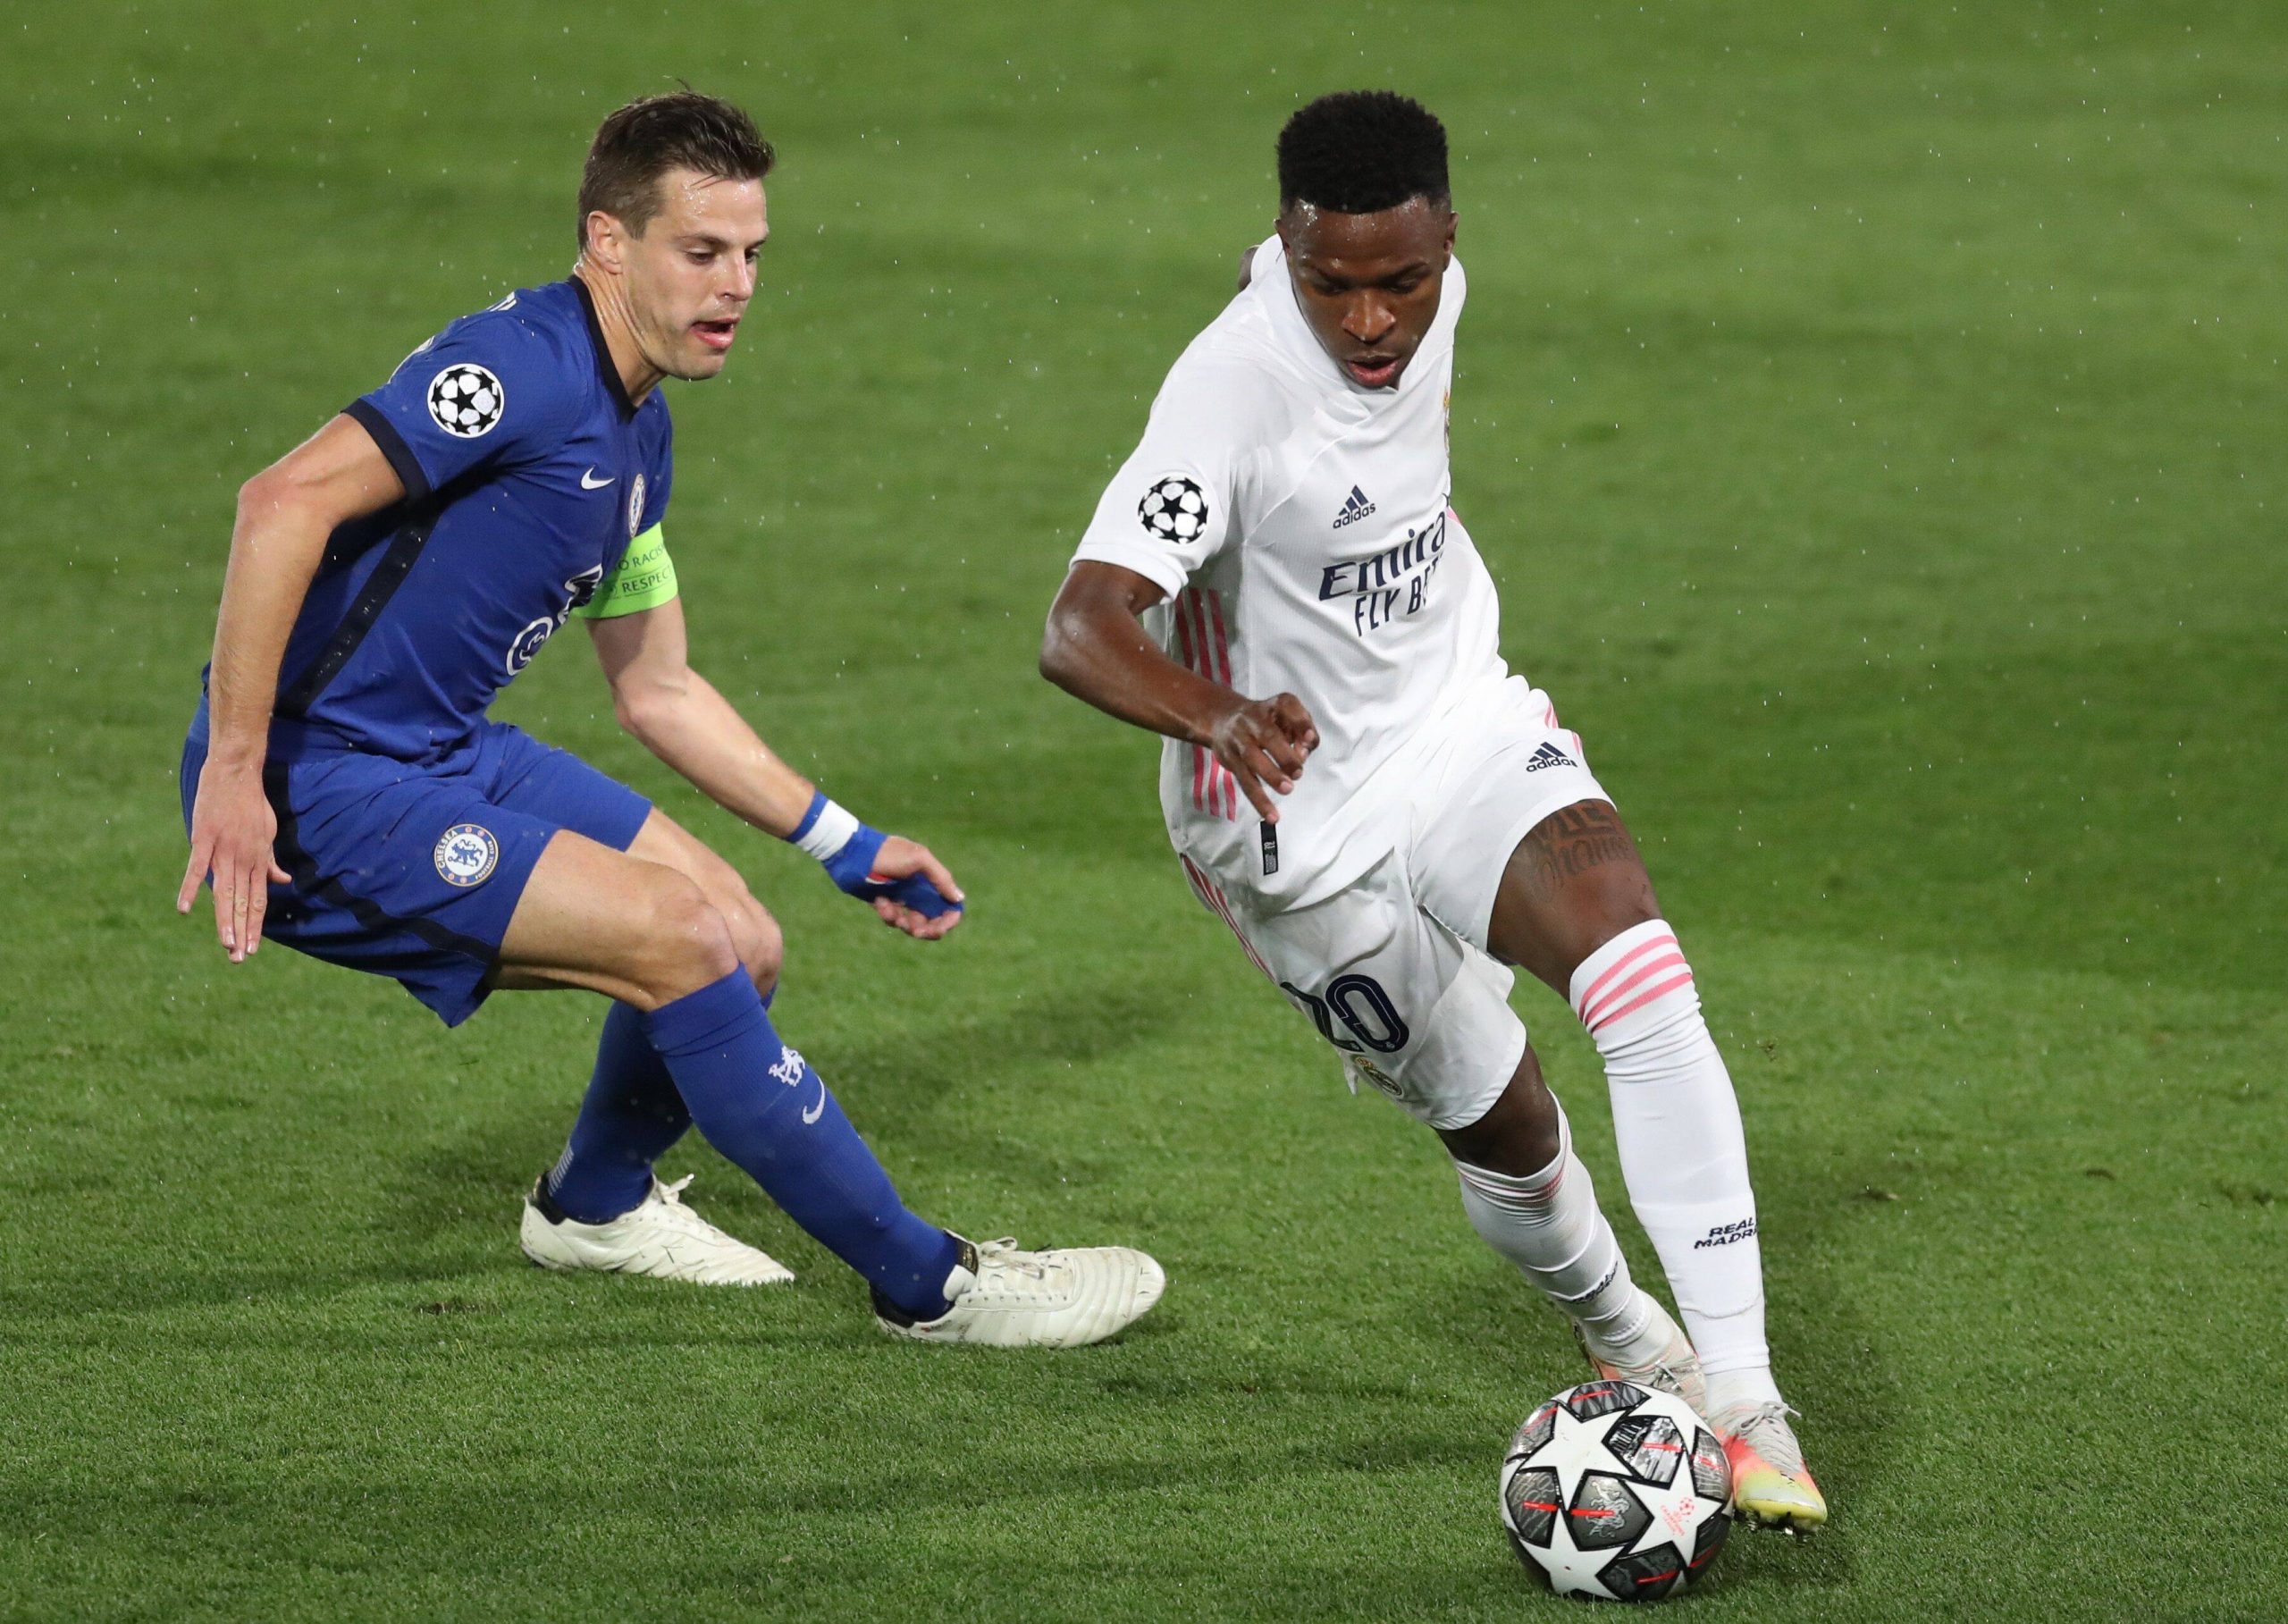 Madrid s Vinicius Jr (R) vies for the ball against Chelsea s Cesar Azpilicueta (L) during the UEFA Champions League firs